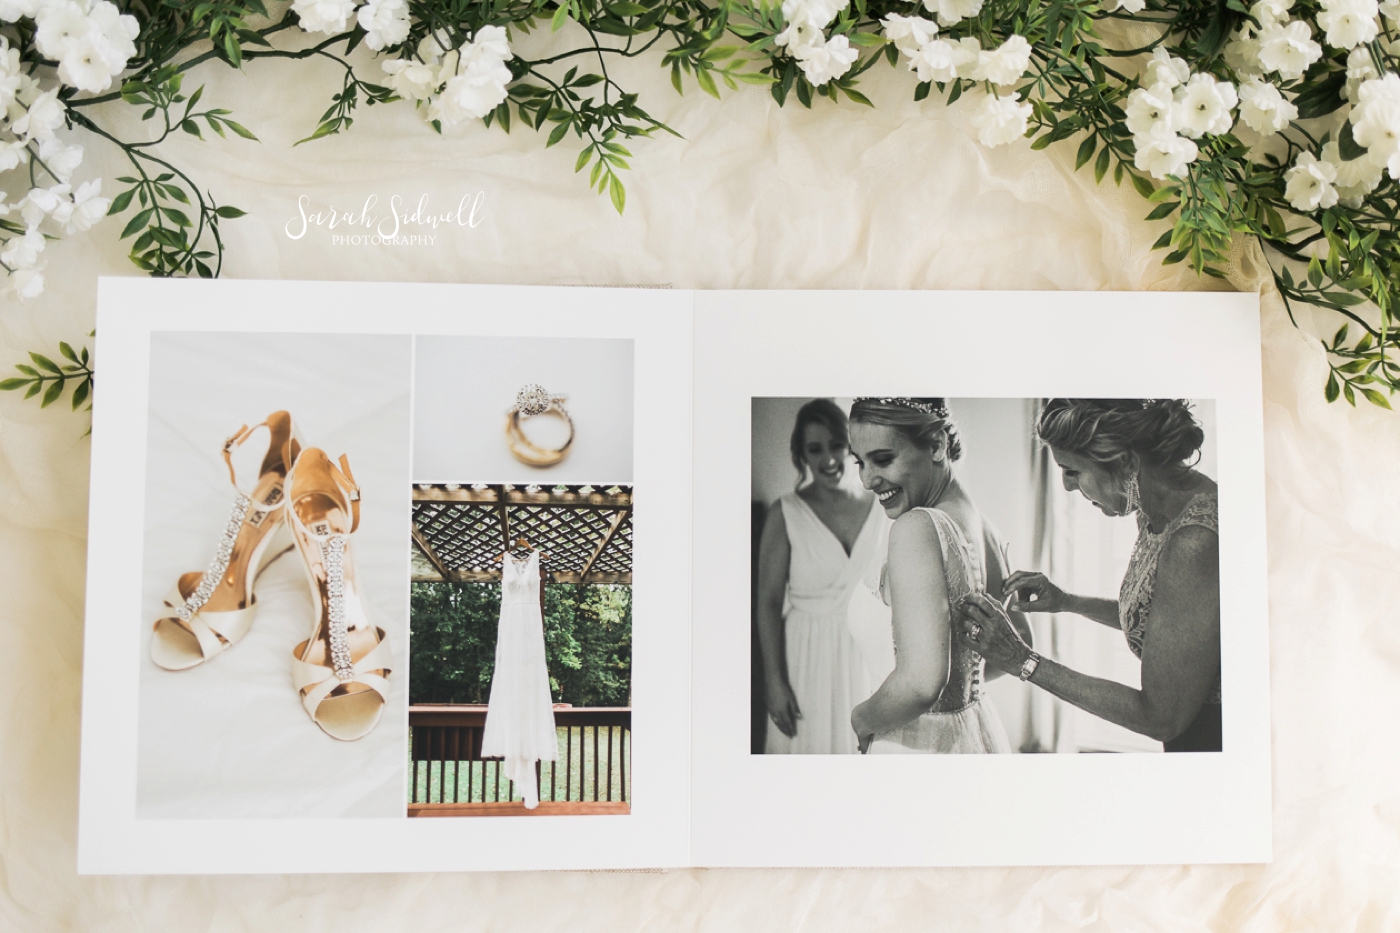 Wedding photo albums are opened to show the quality of the product. 